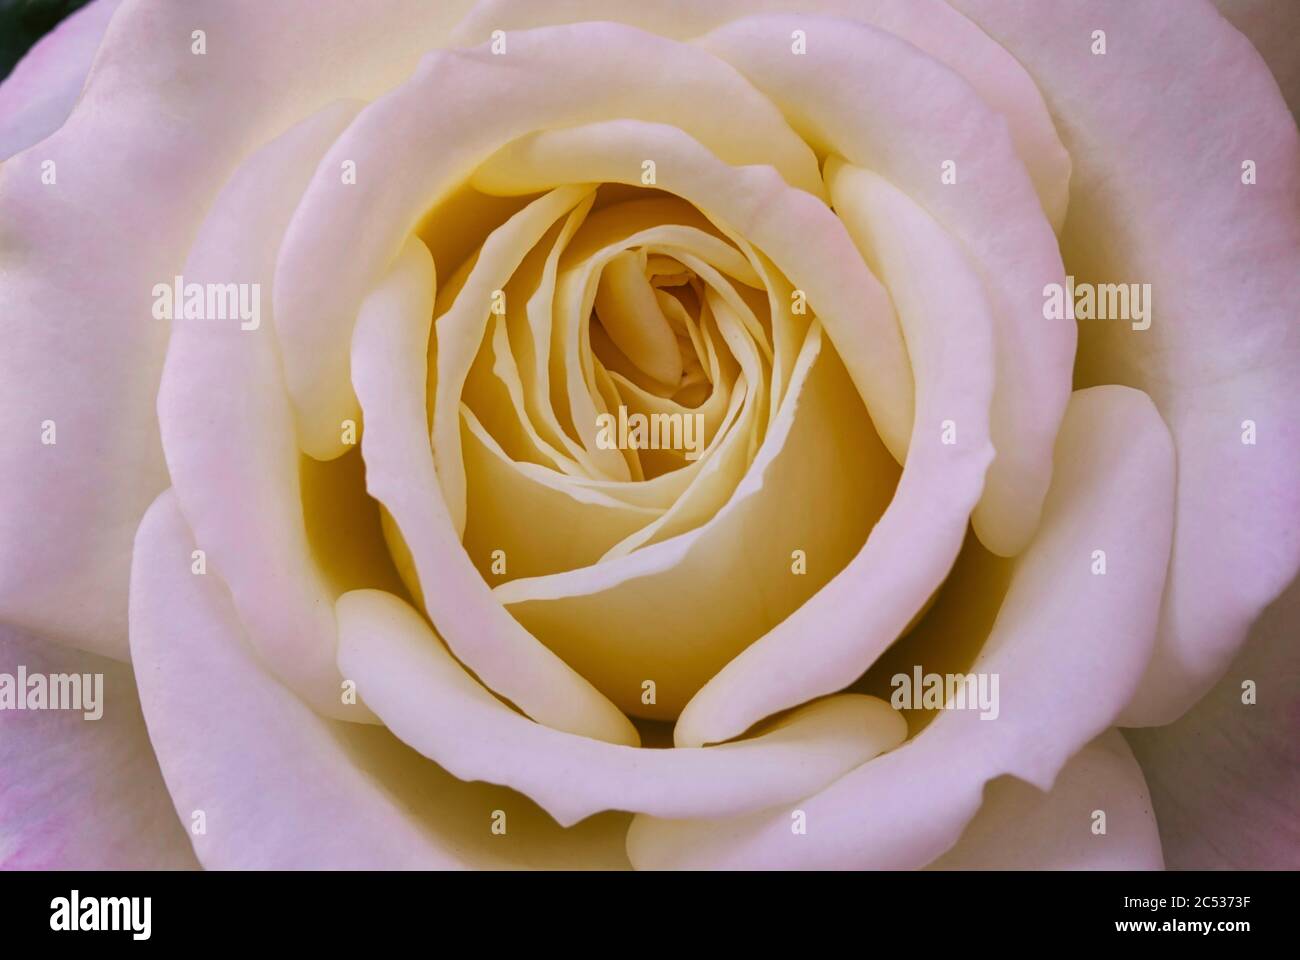 Macro photo of a soft pink rose center. Stock Photo